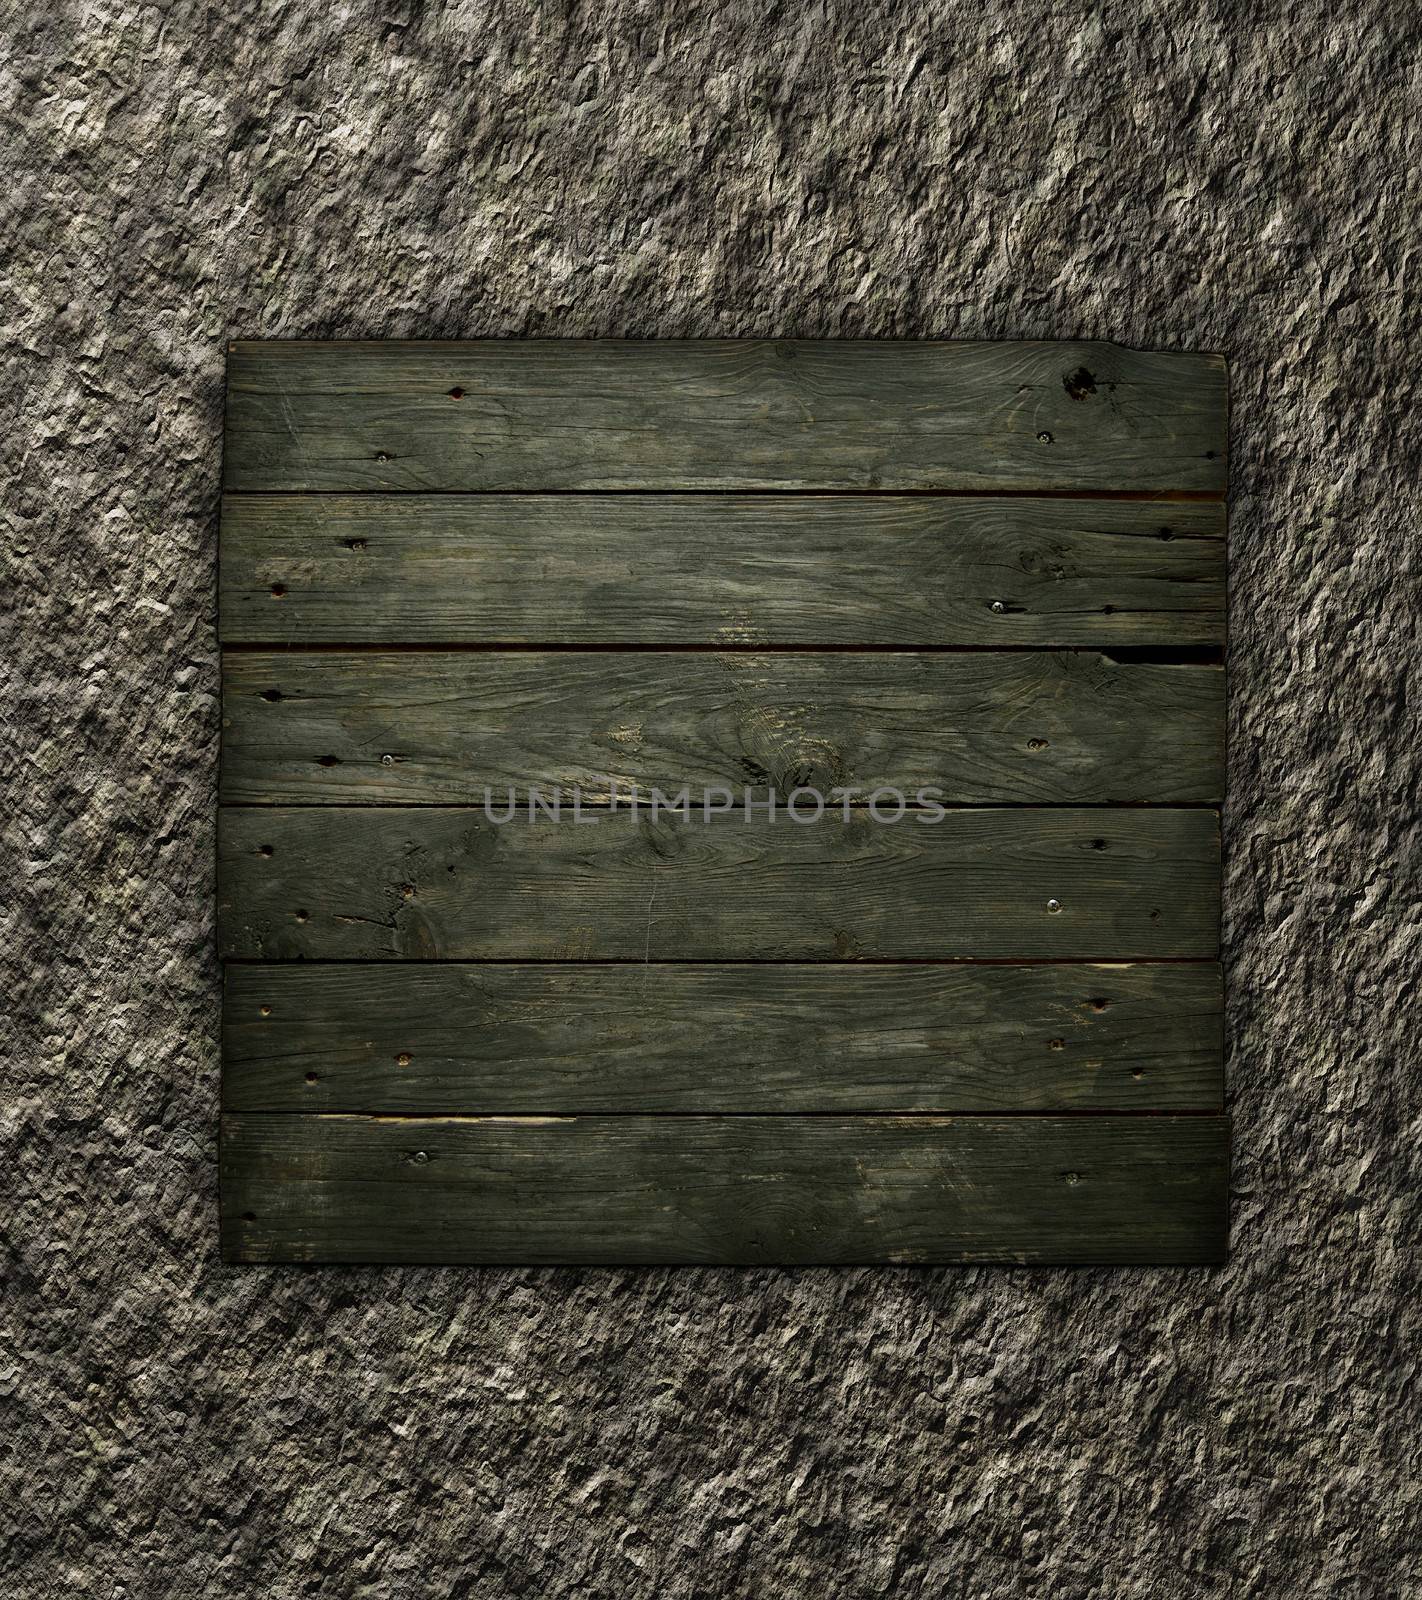 Old wooden planks on stone background. Wooden sign